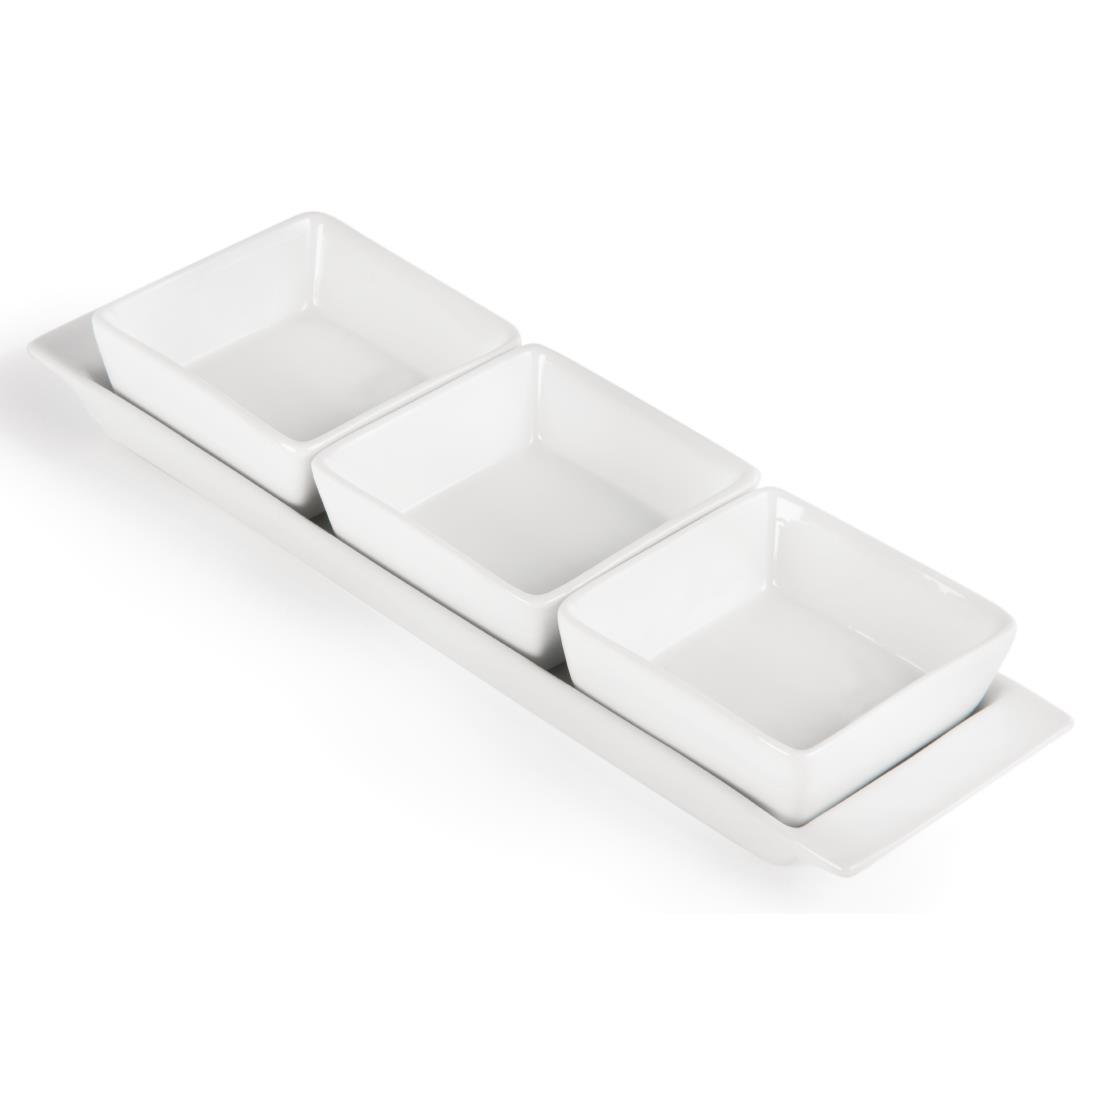 Olympia Whiteware Snack Dishes with Plates 3 Section (Pack of 2) - U816  - 3